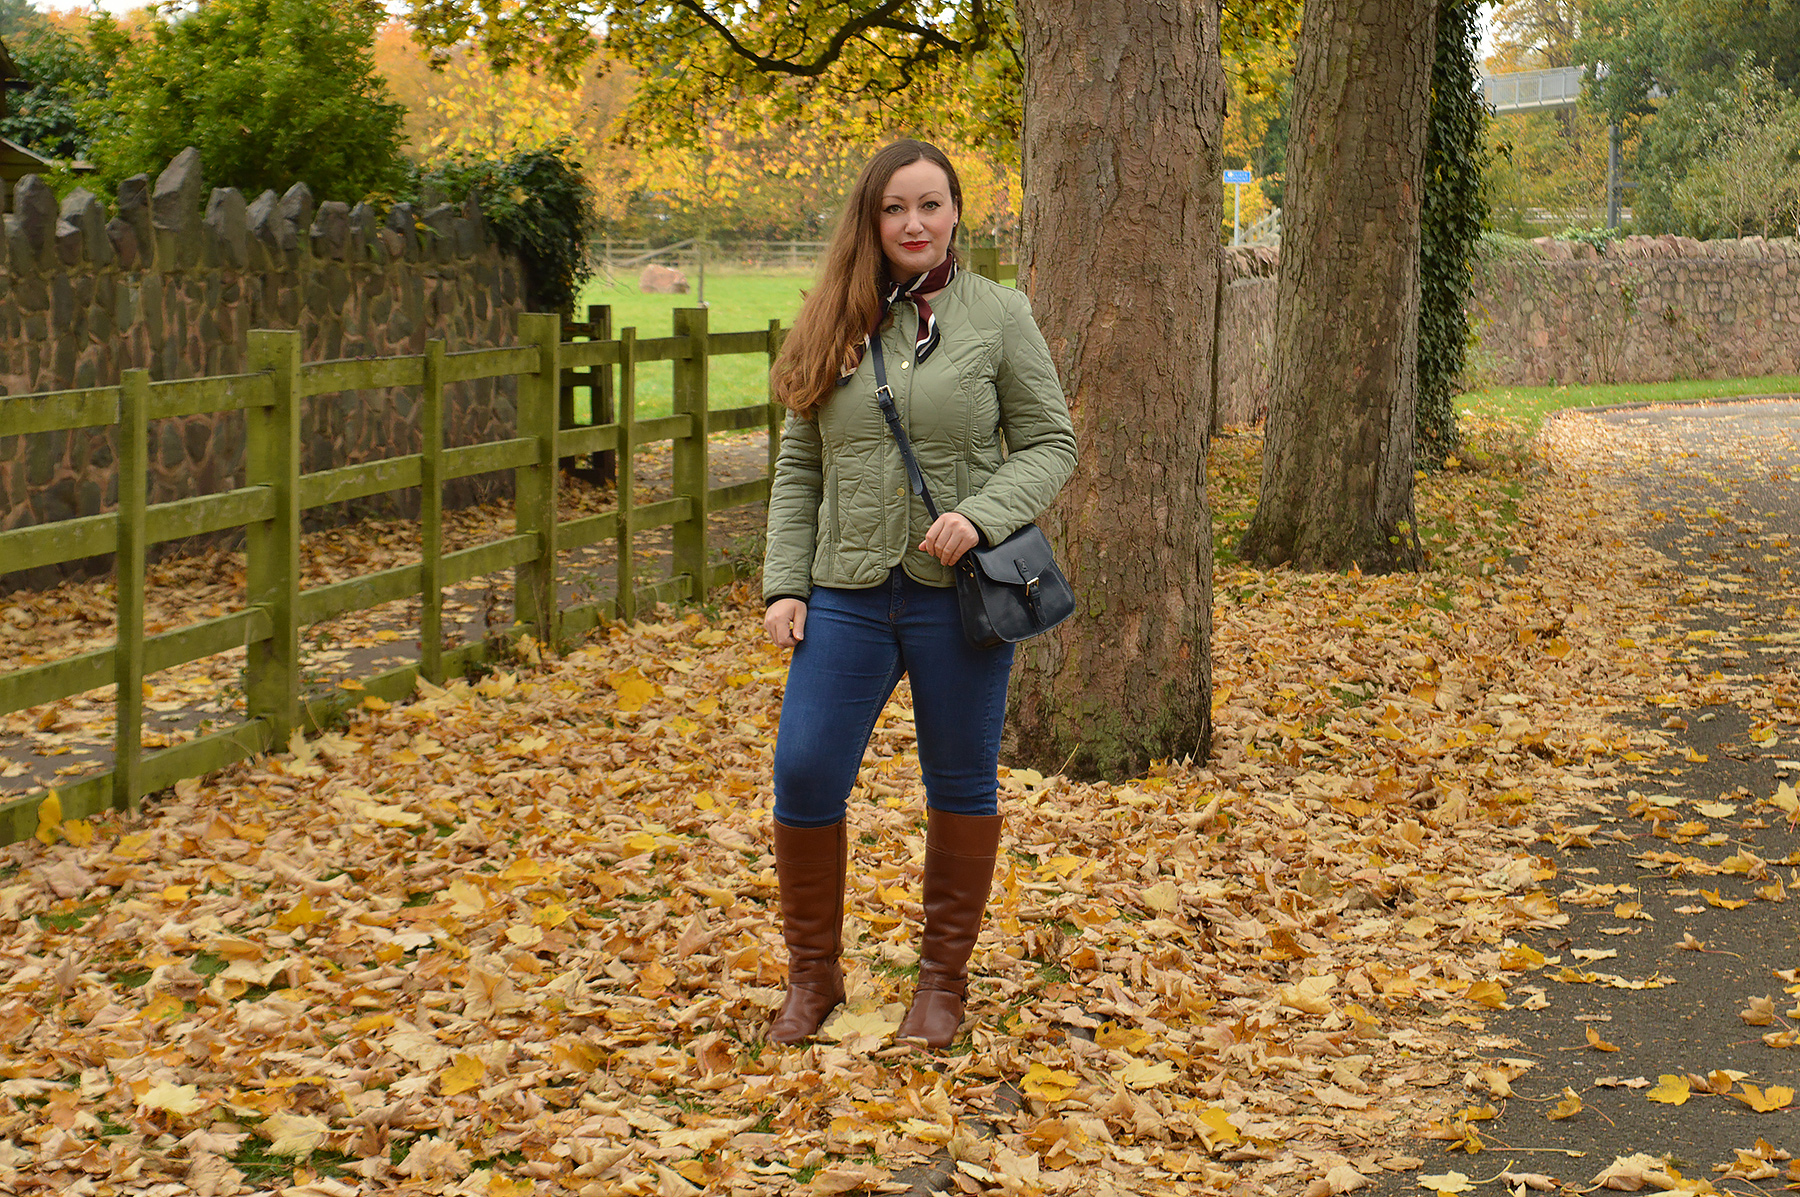 Joules Quilted Jacket Outfit Ideas